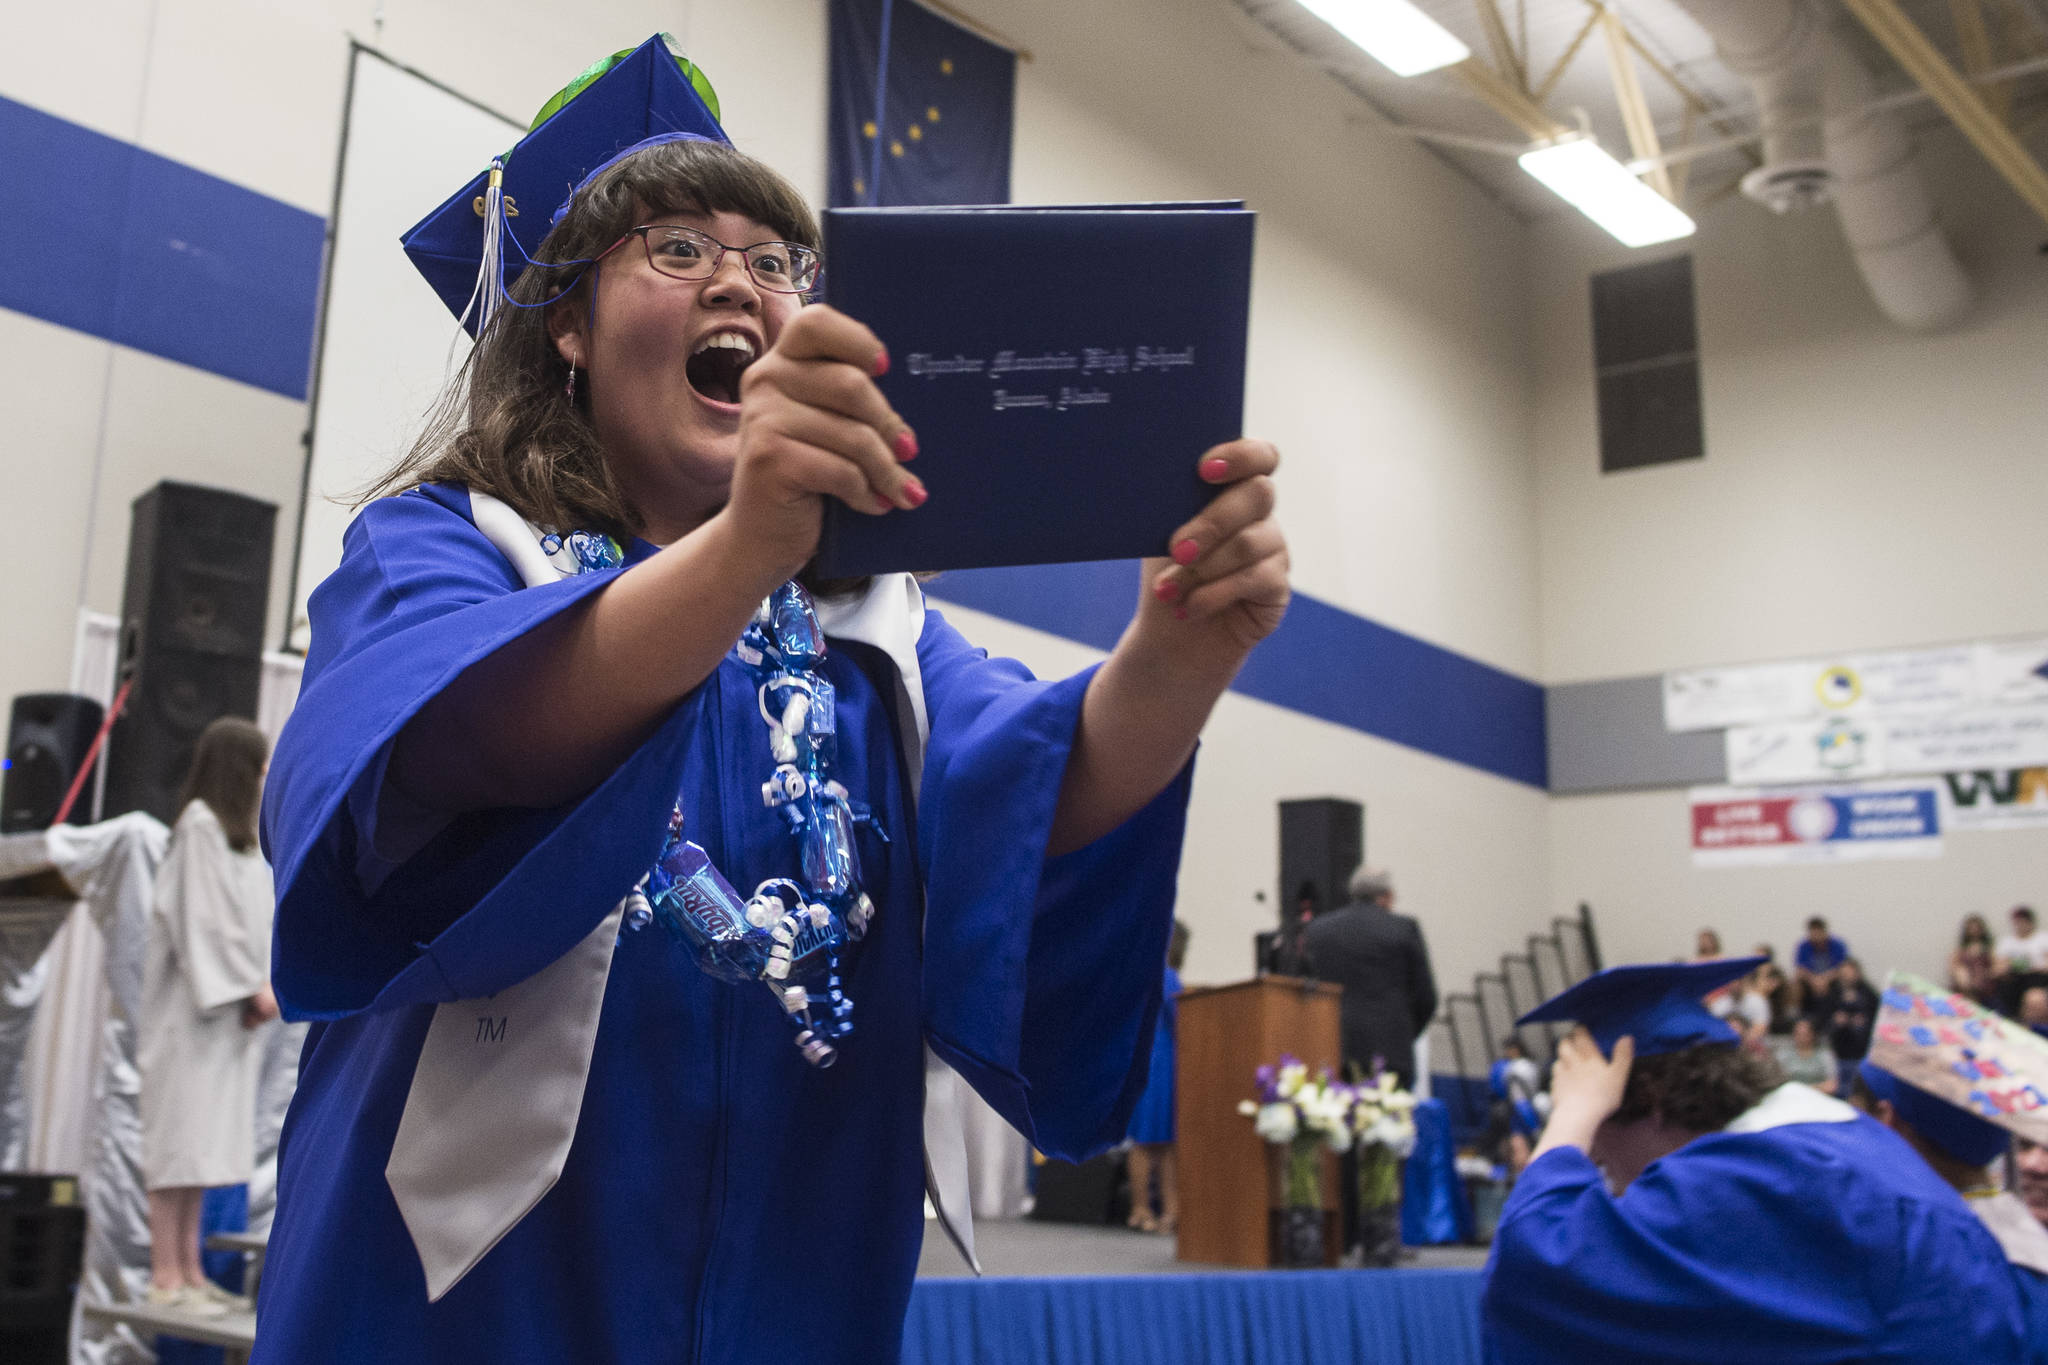 Jennifer Pyeatt reacts to receiving her diploma after walking off the stage during the Thunder Mountain High School graduation on Sunday, May 26, 2019. (Michael Penn | Juneau Empire)